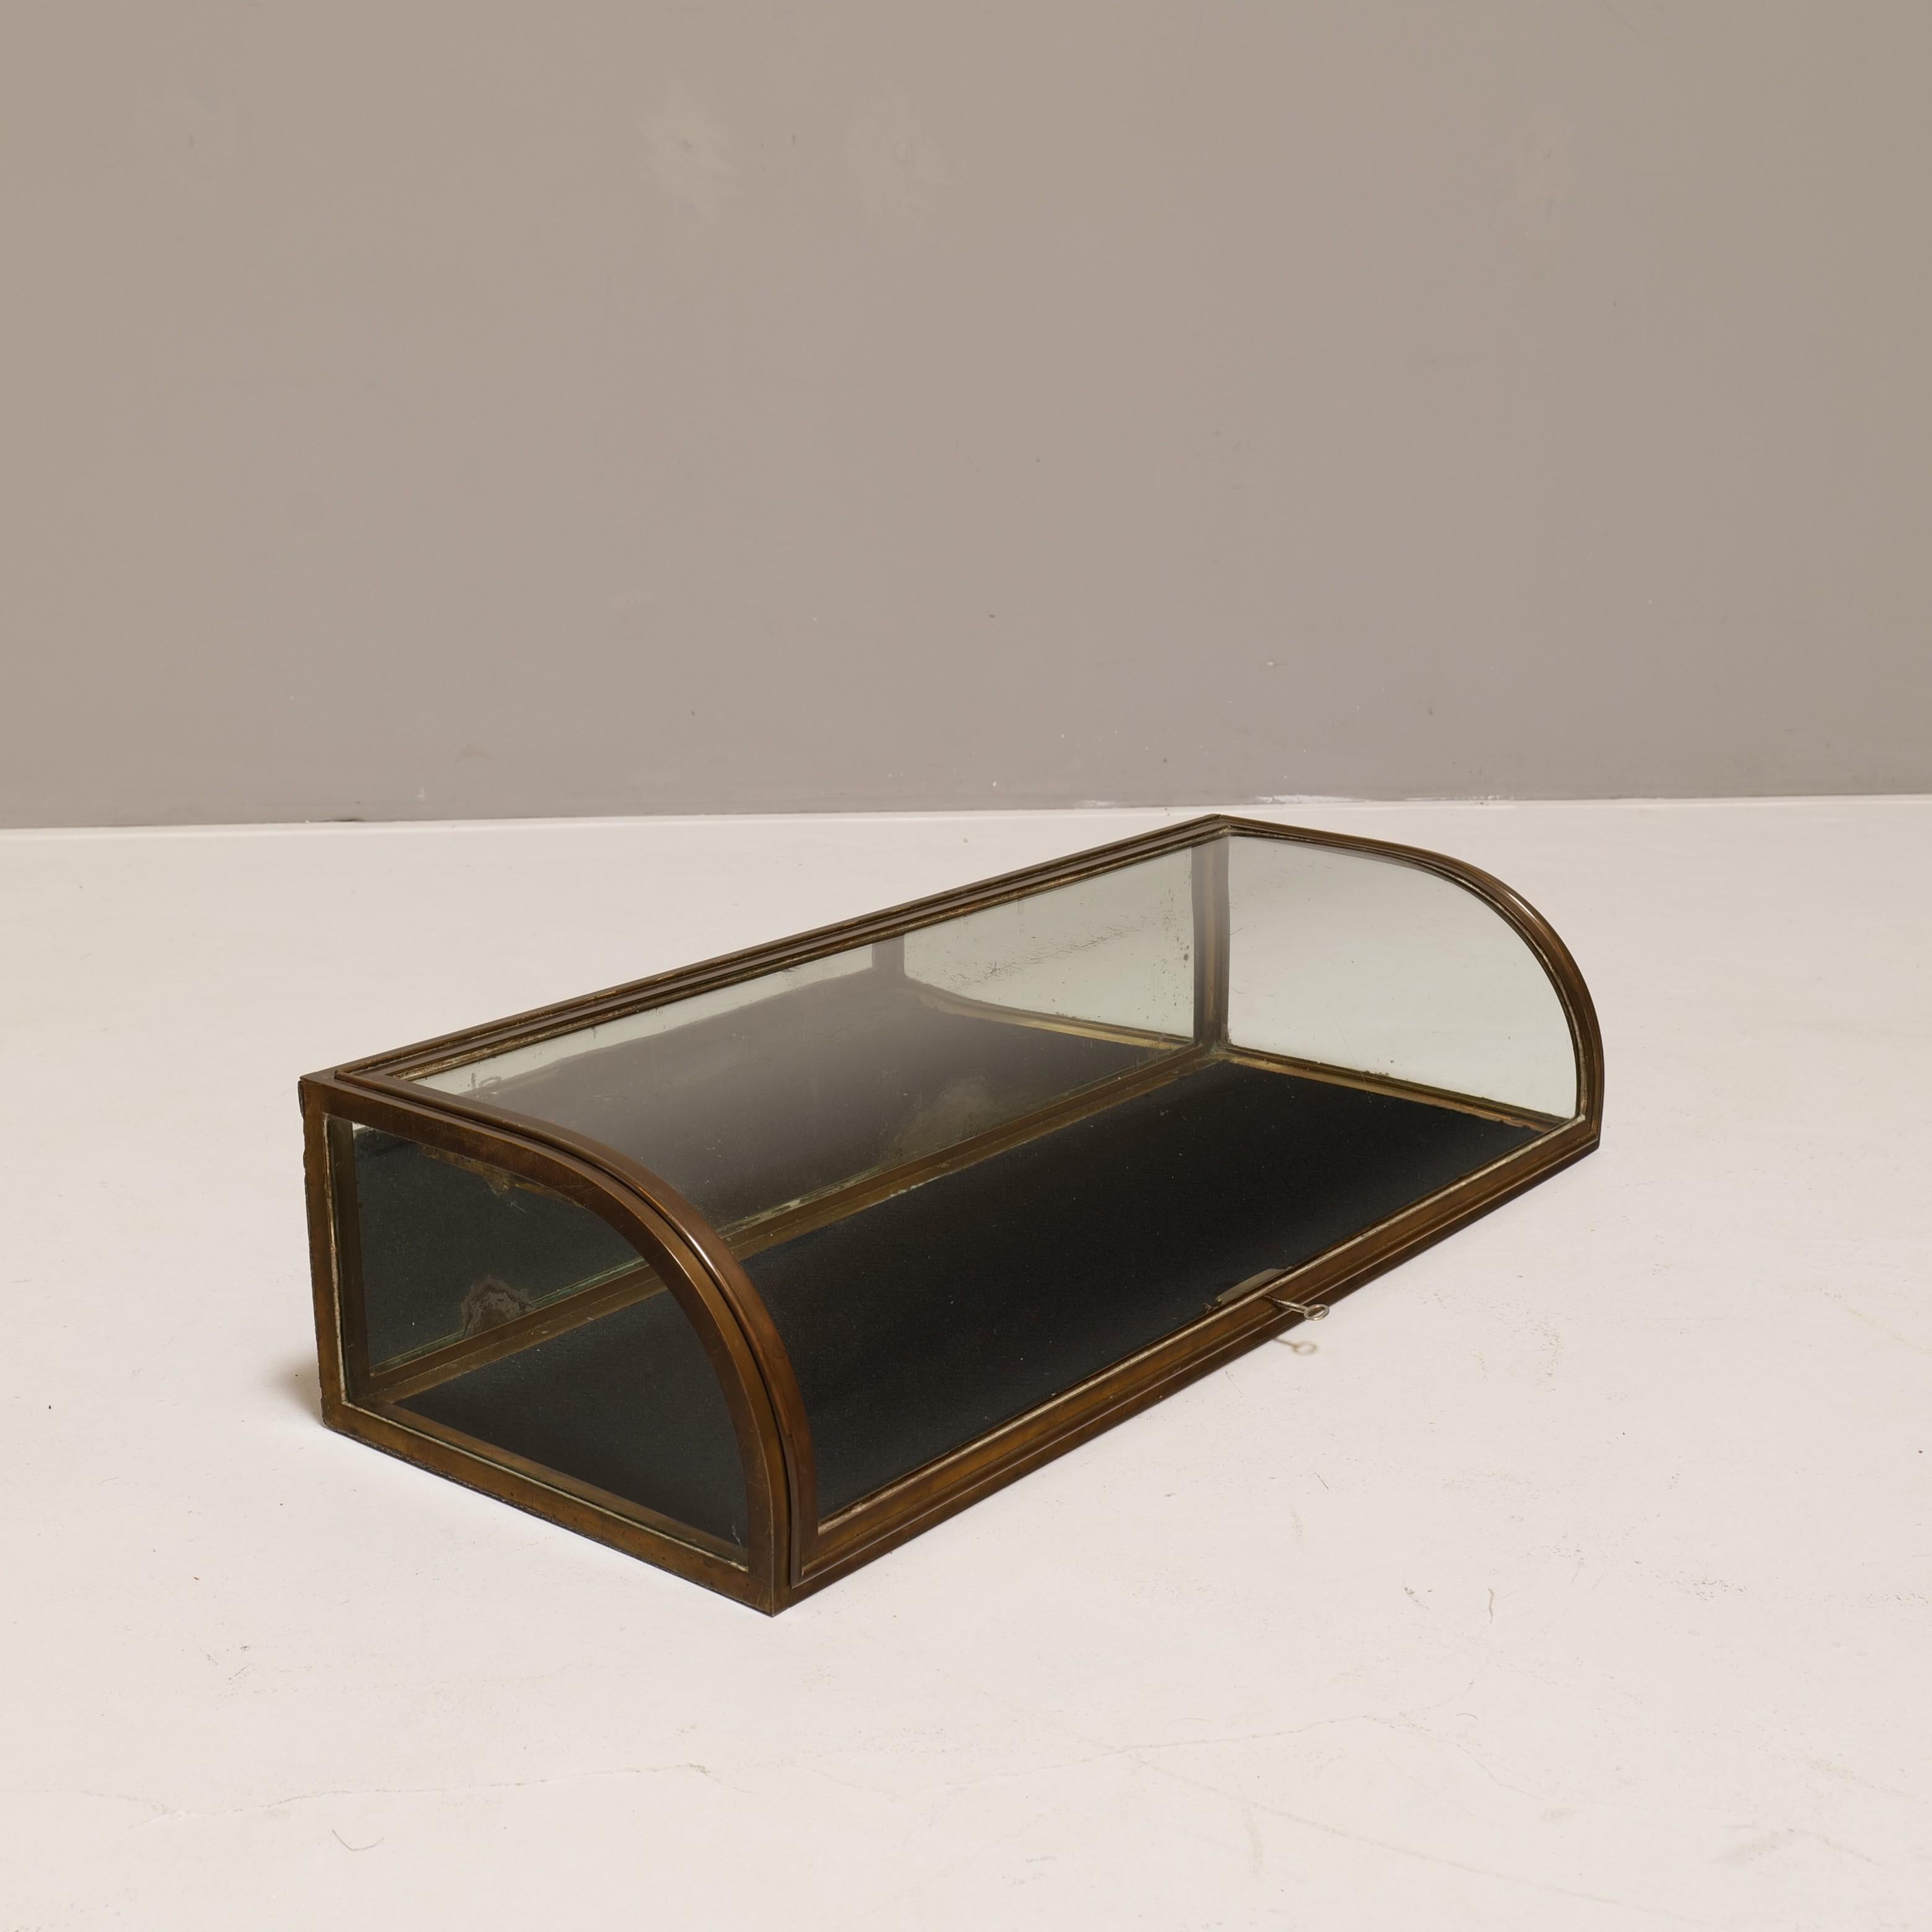 Carved Art Deco Curved Glas Jewelry Display Counter by Paris, 1920's For Sale